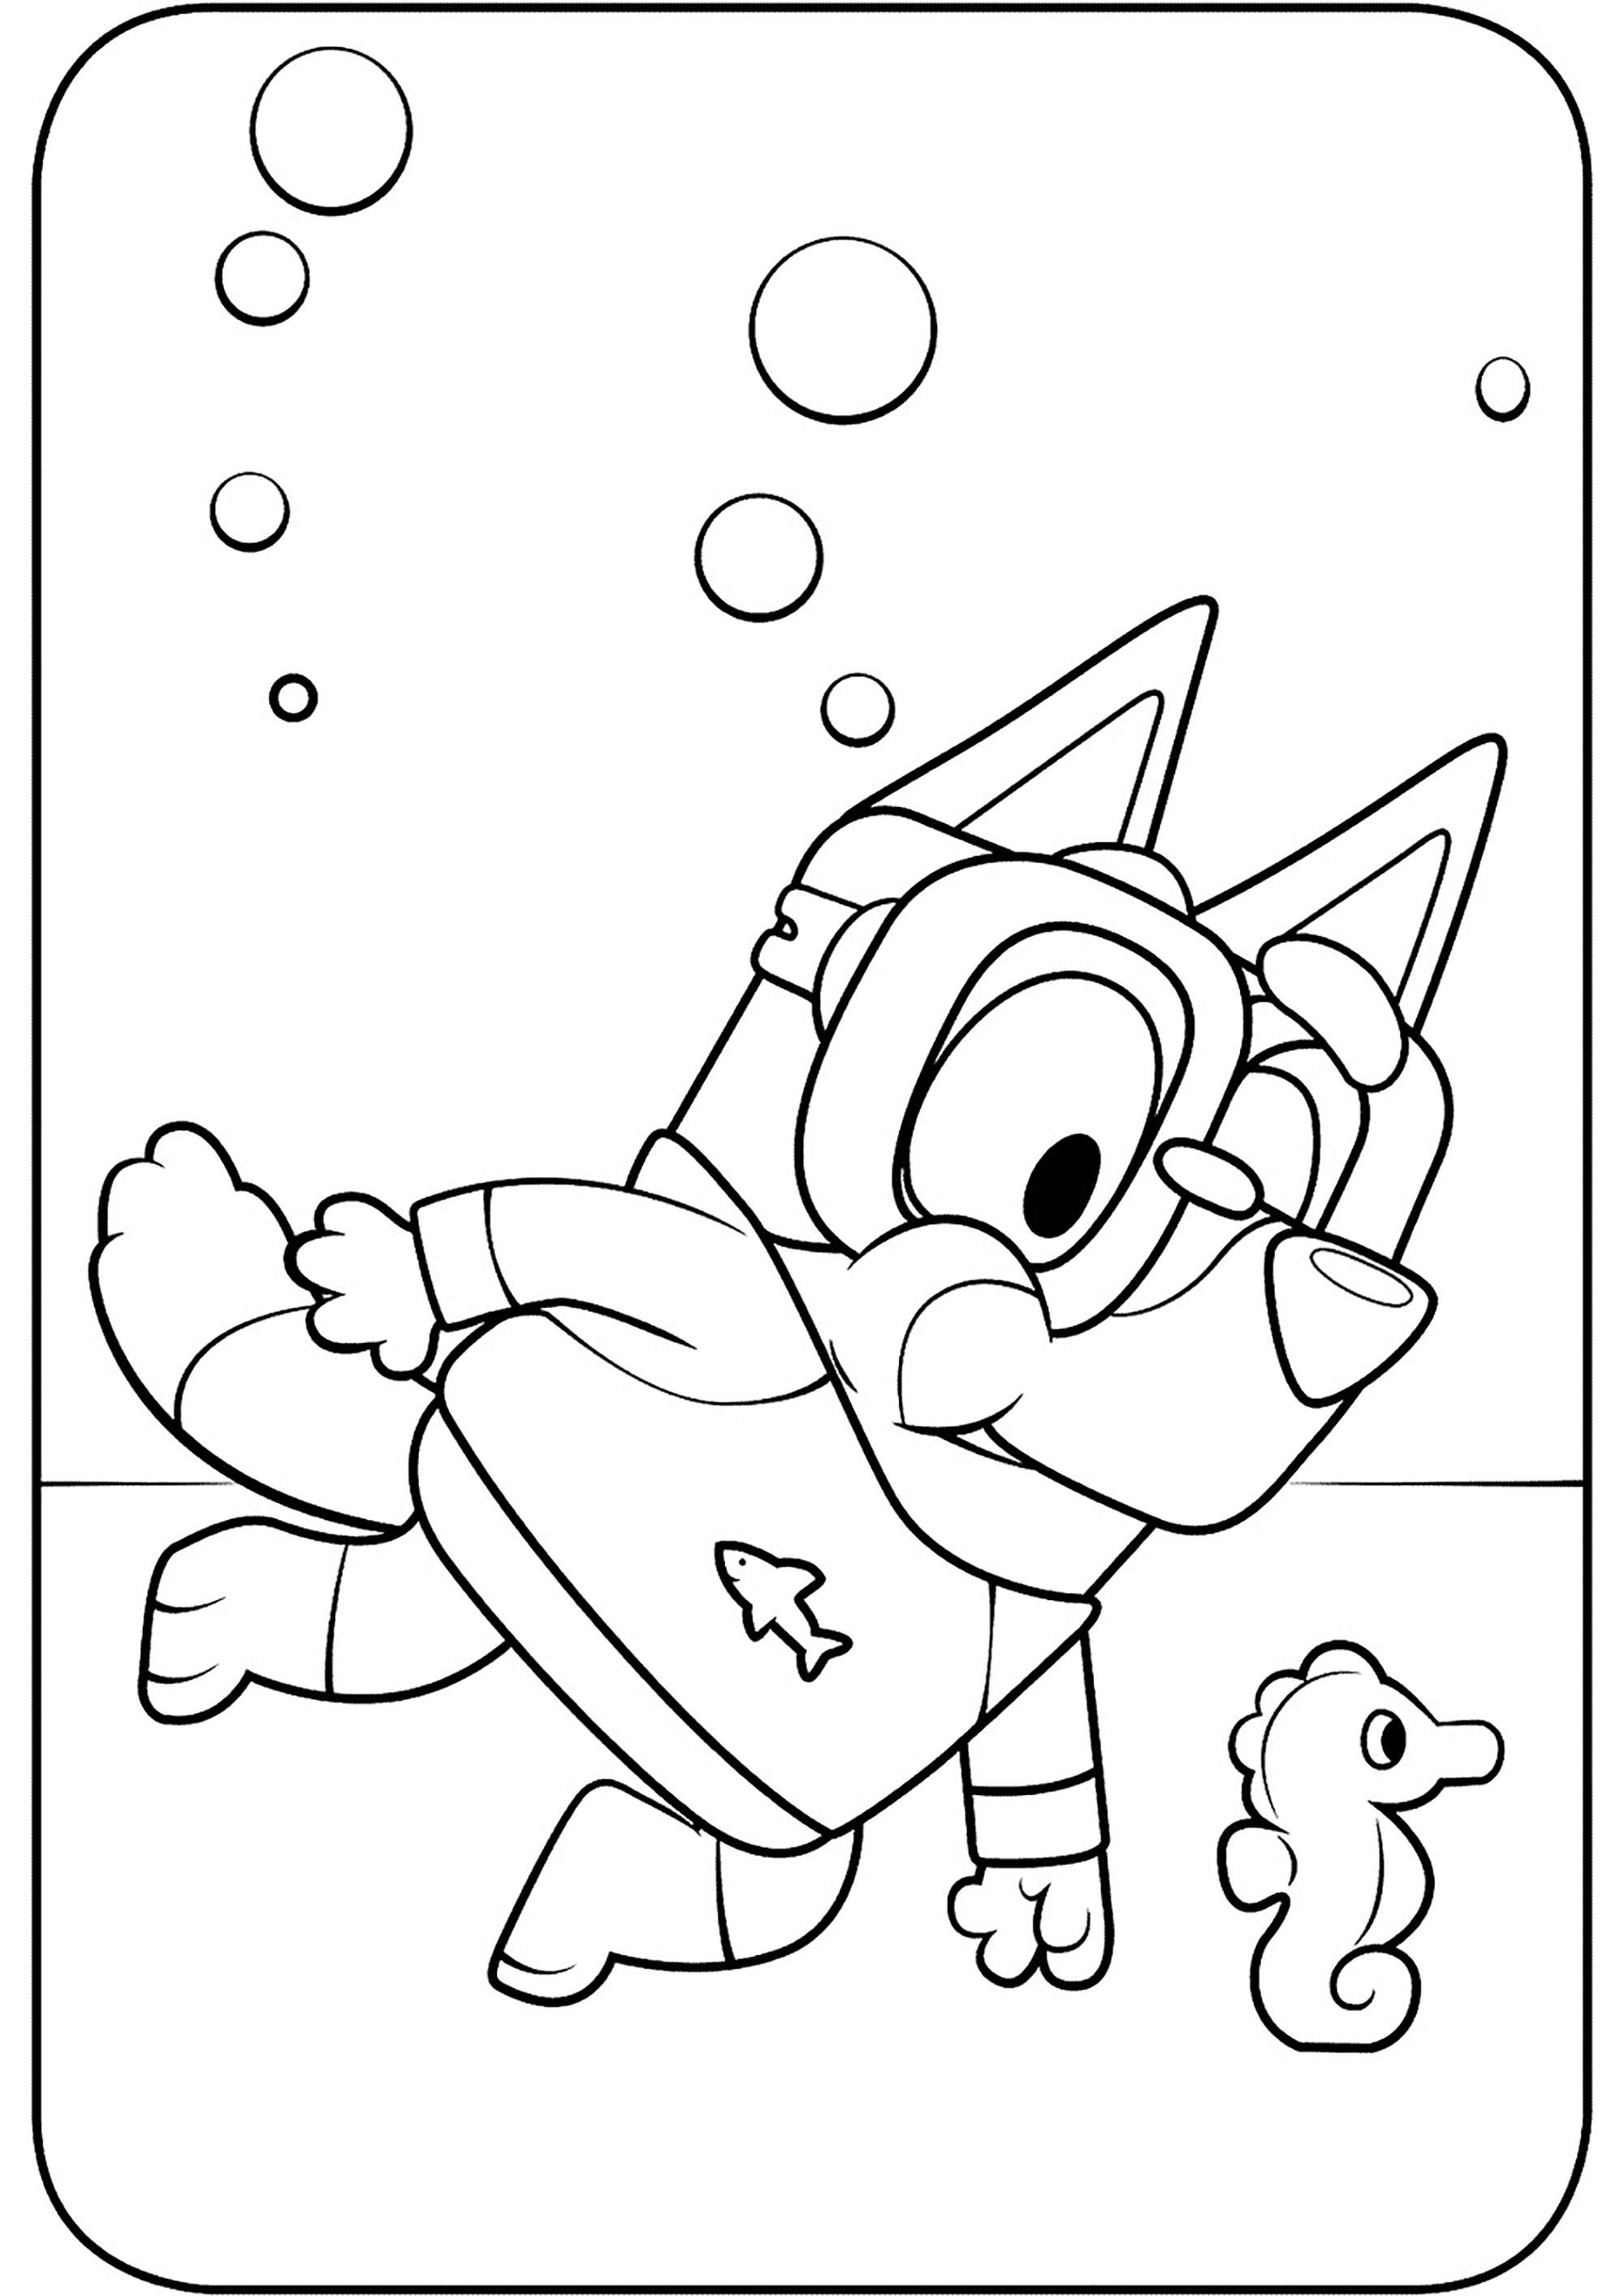 Bluey coloring page: Bluey under water